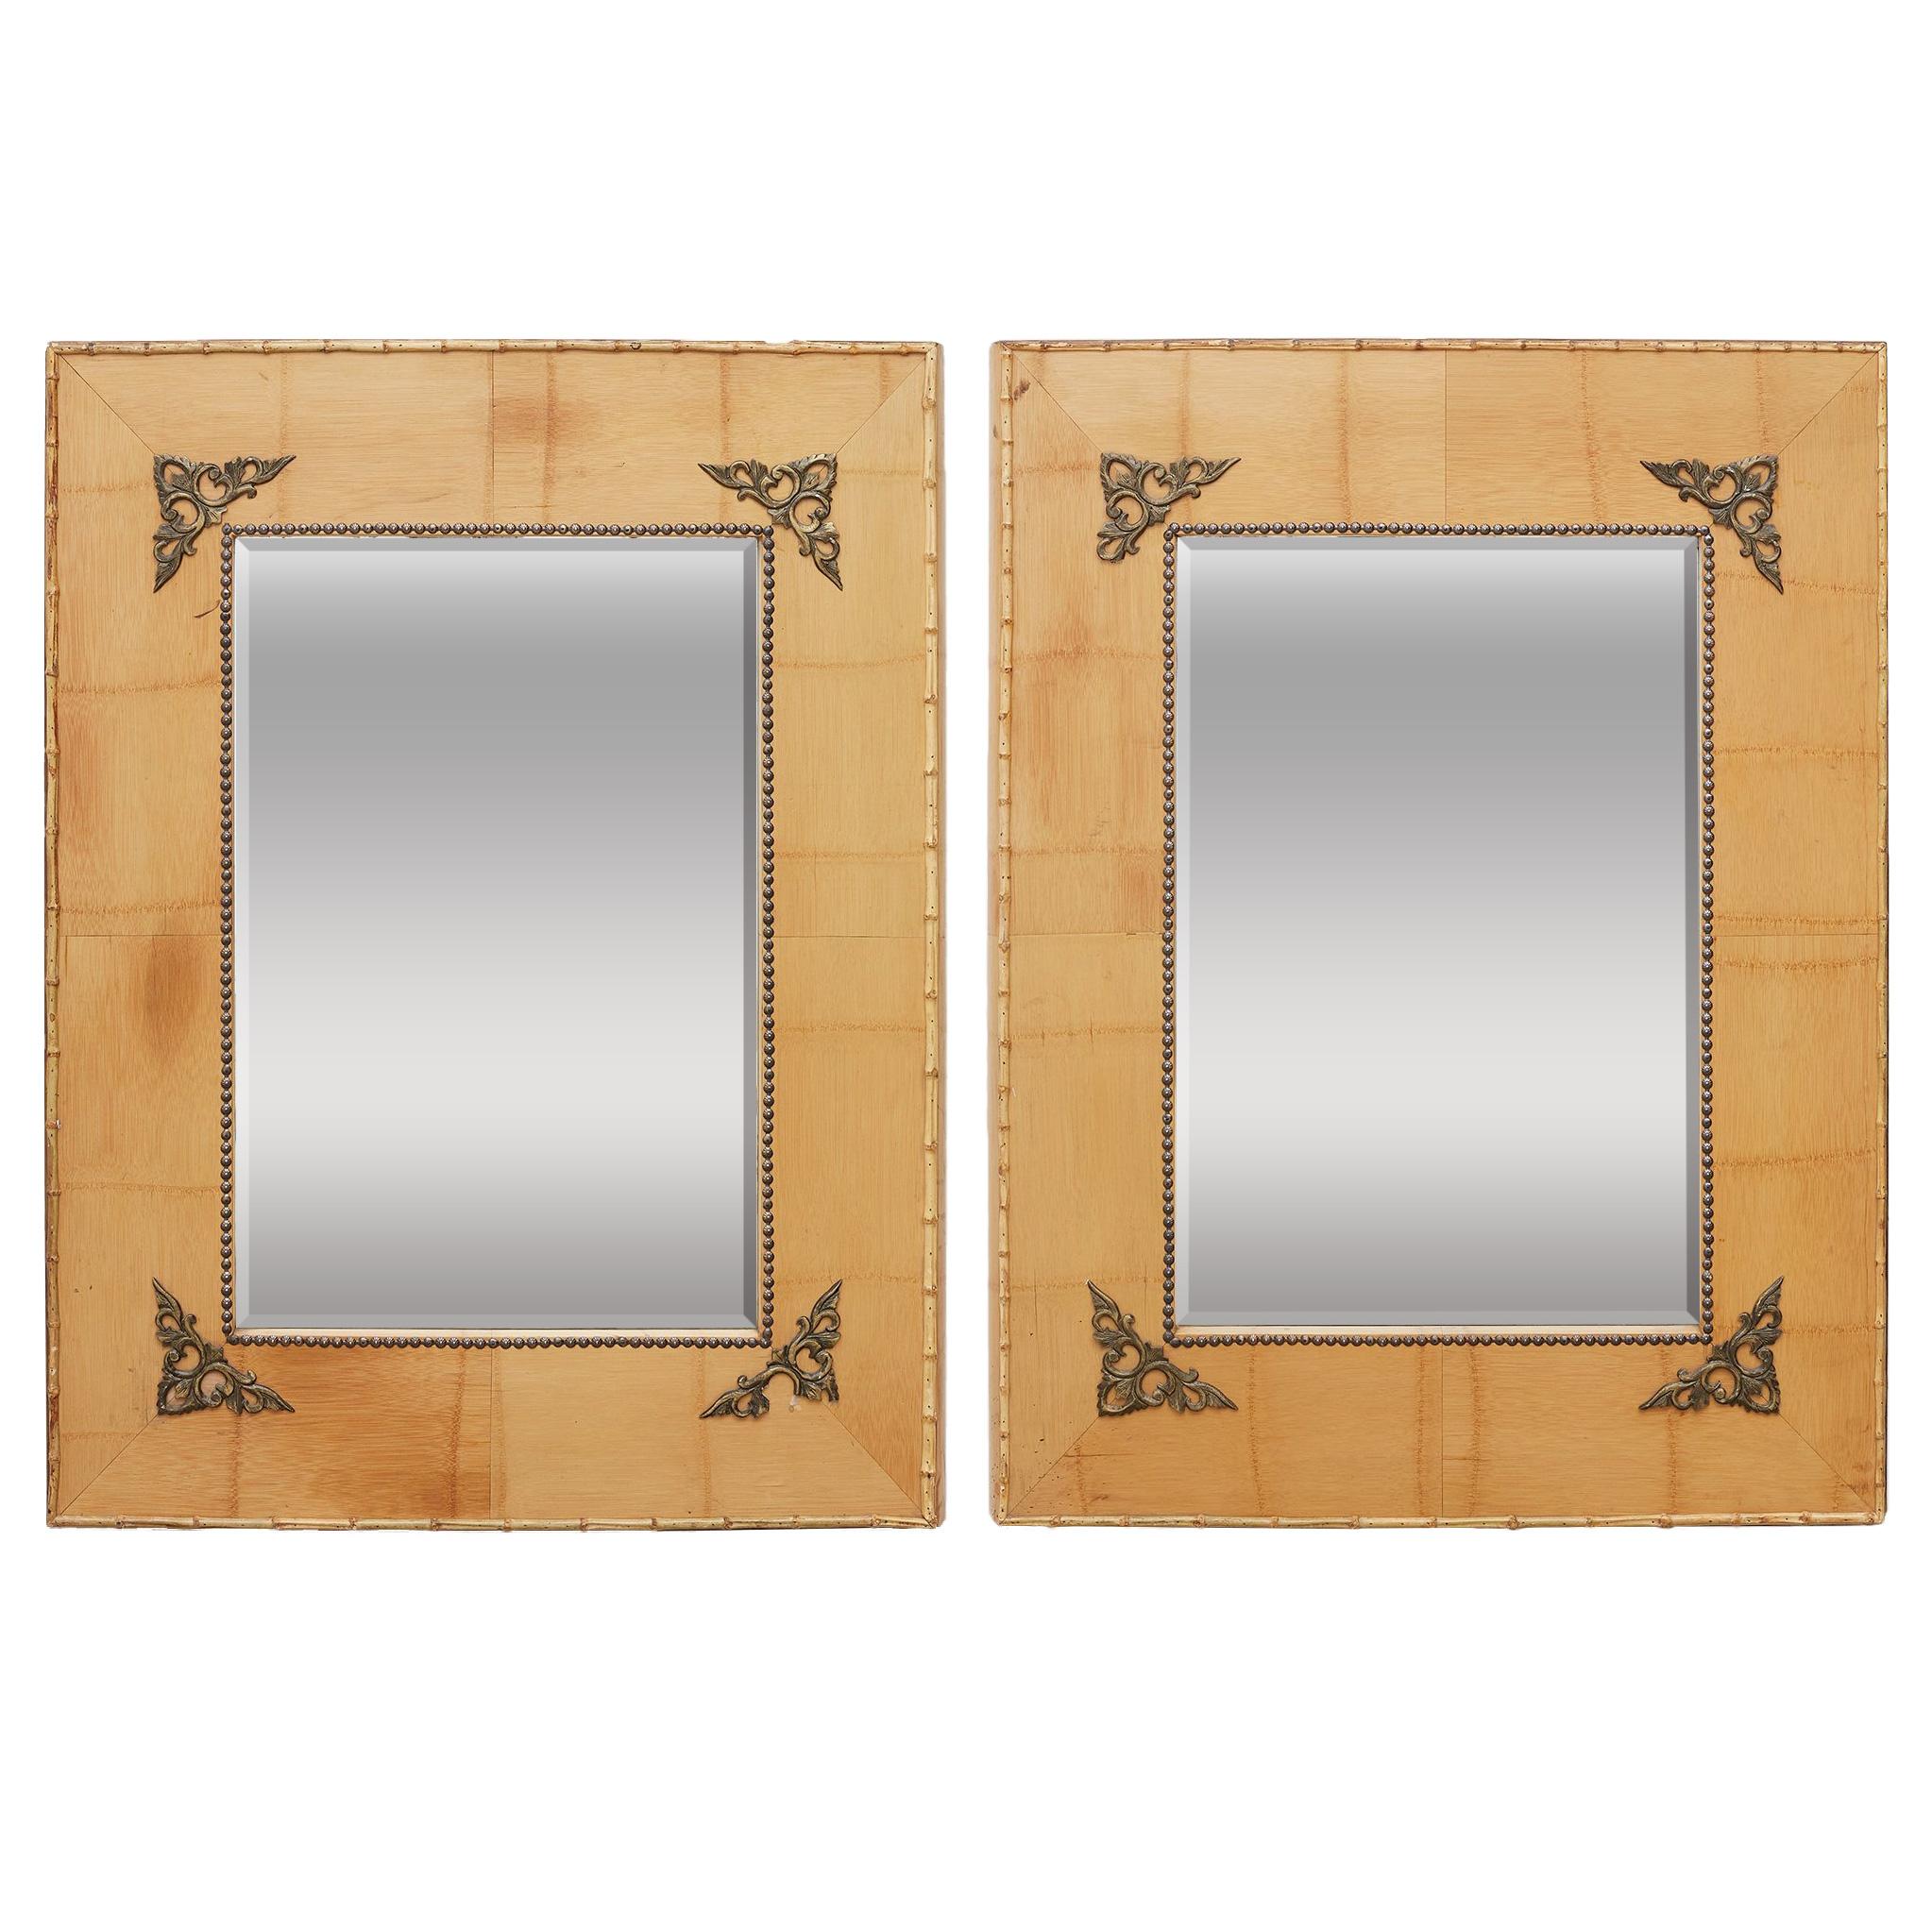 Pair of Bamboo Mirrors with Book Motif For Sale